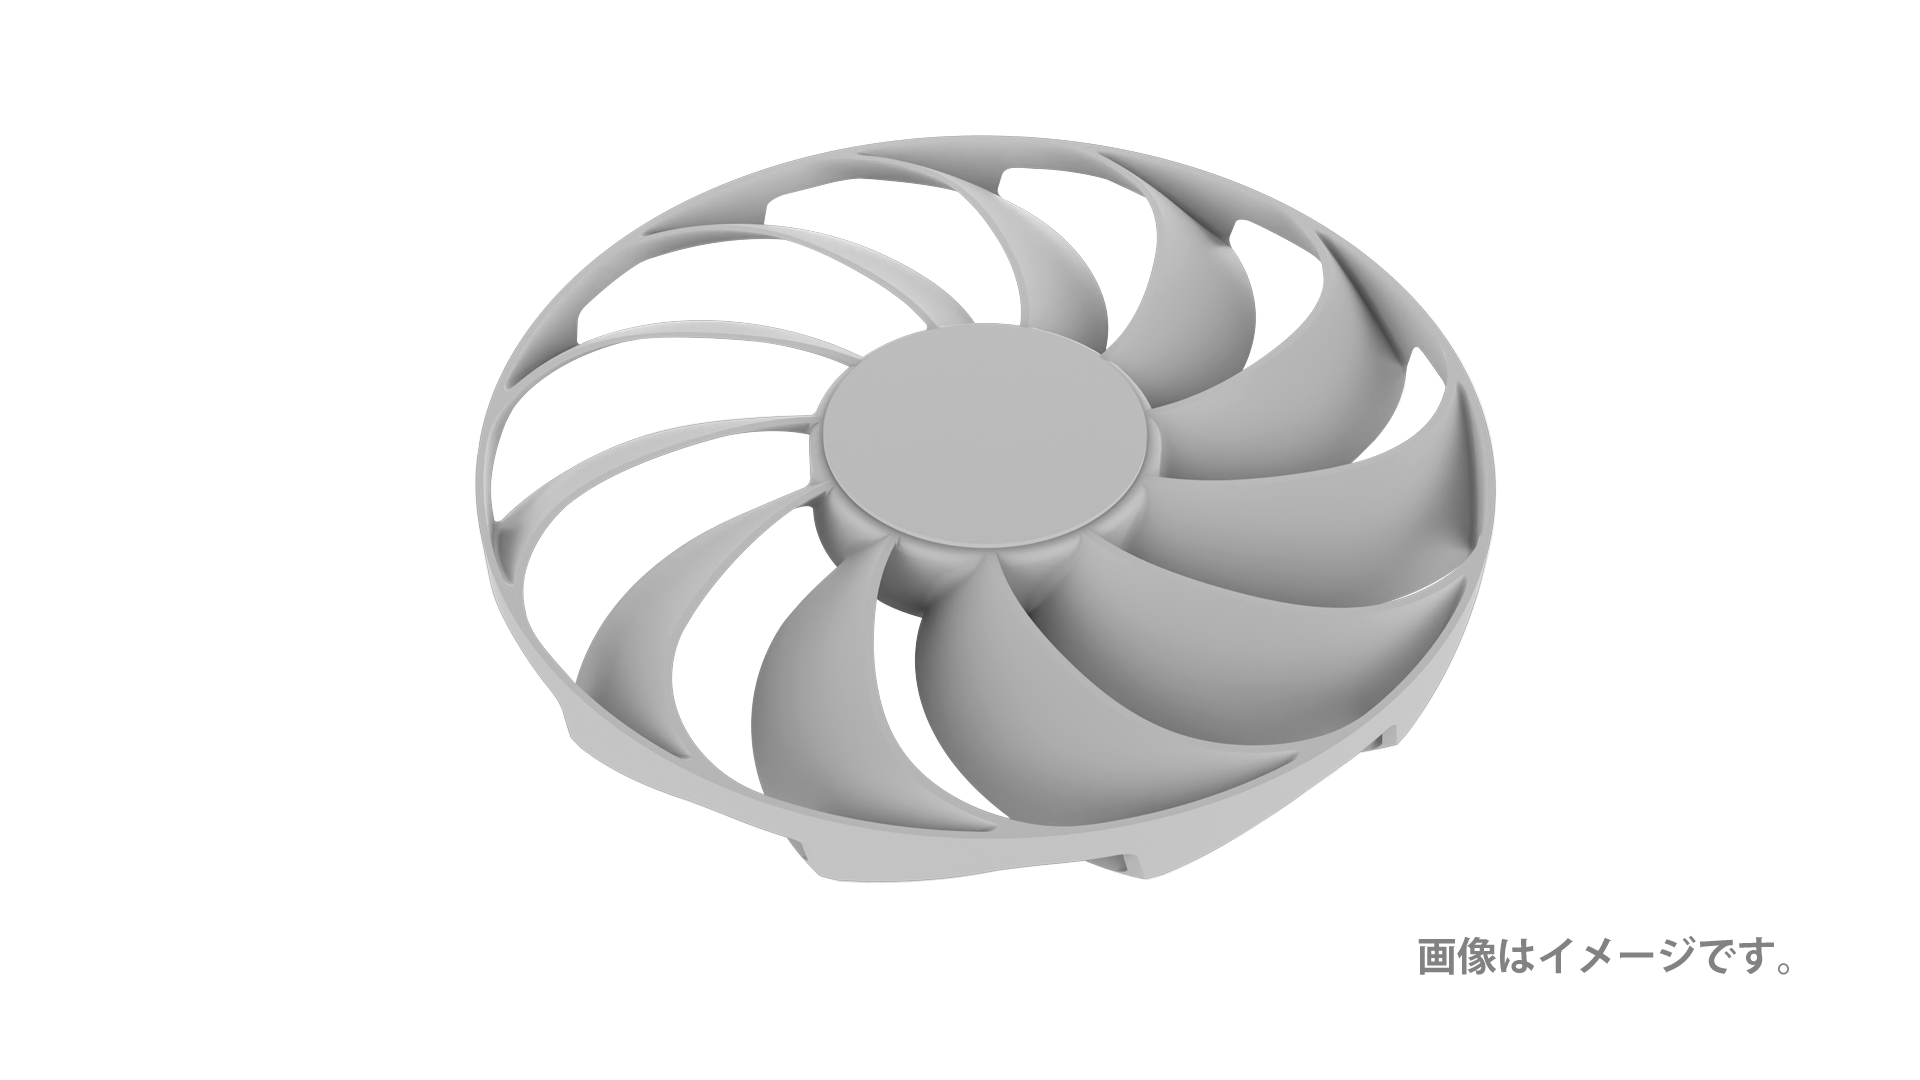 A fan spins, slows to a stop when the temperature reads 55 Celsius.